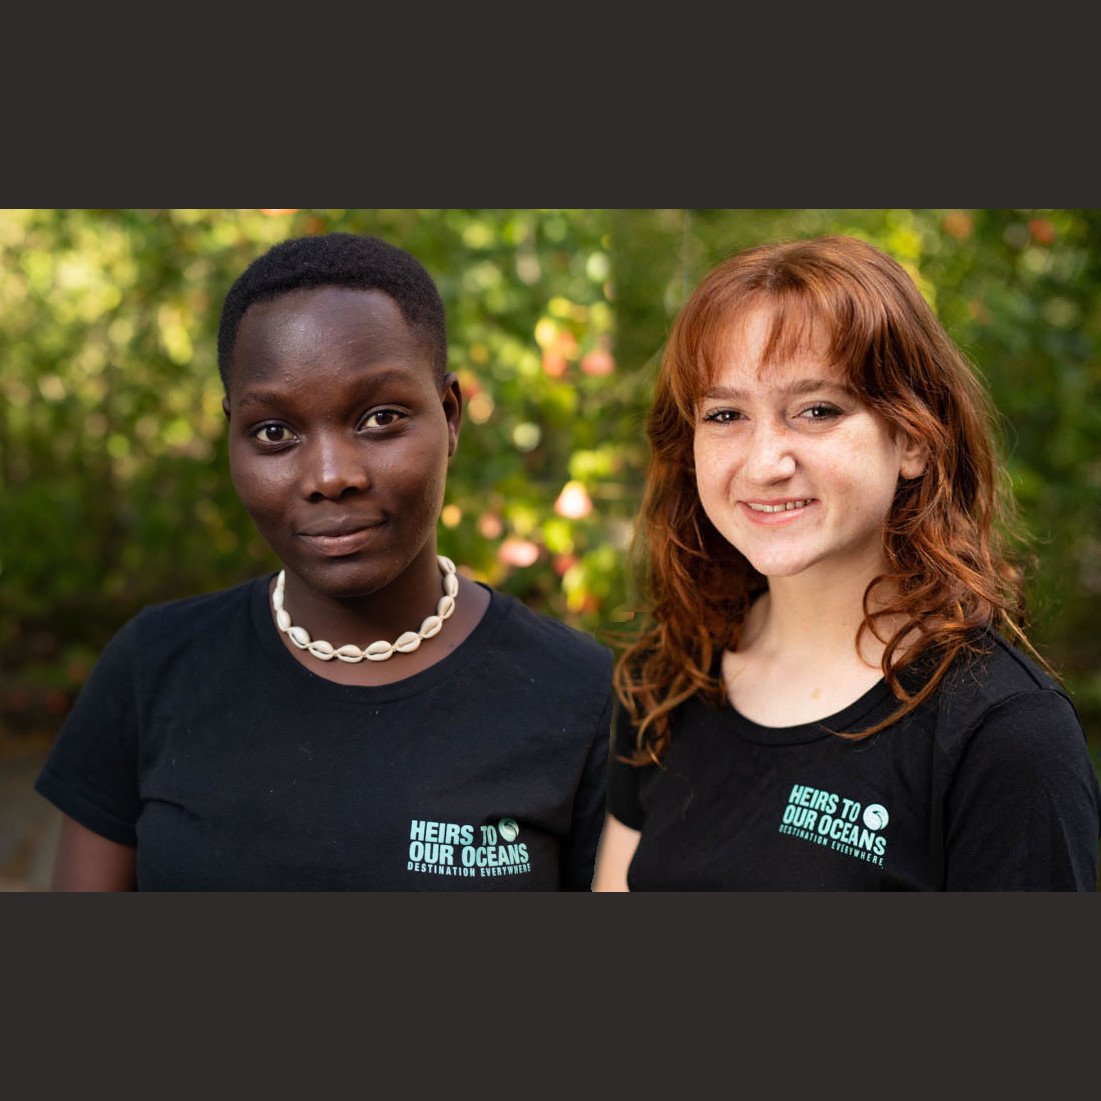 Two young activists wearing matching T-shirts that say "Heirs to Our Oceans," facing the camera in front of a leafy background